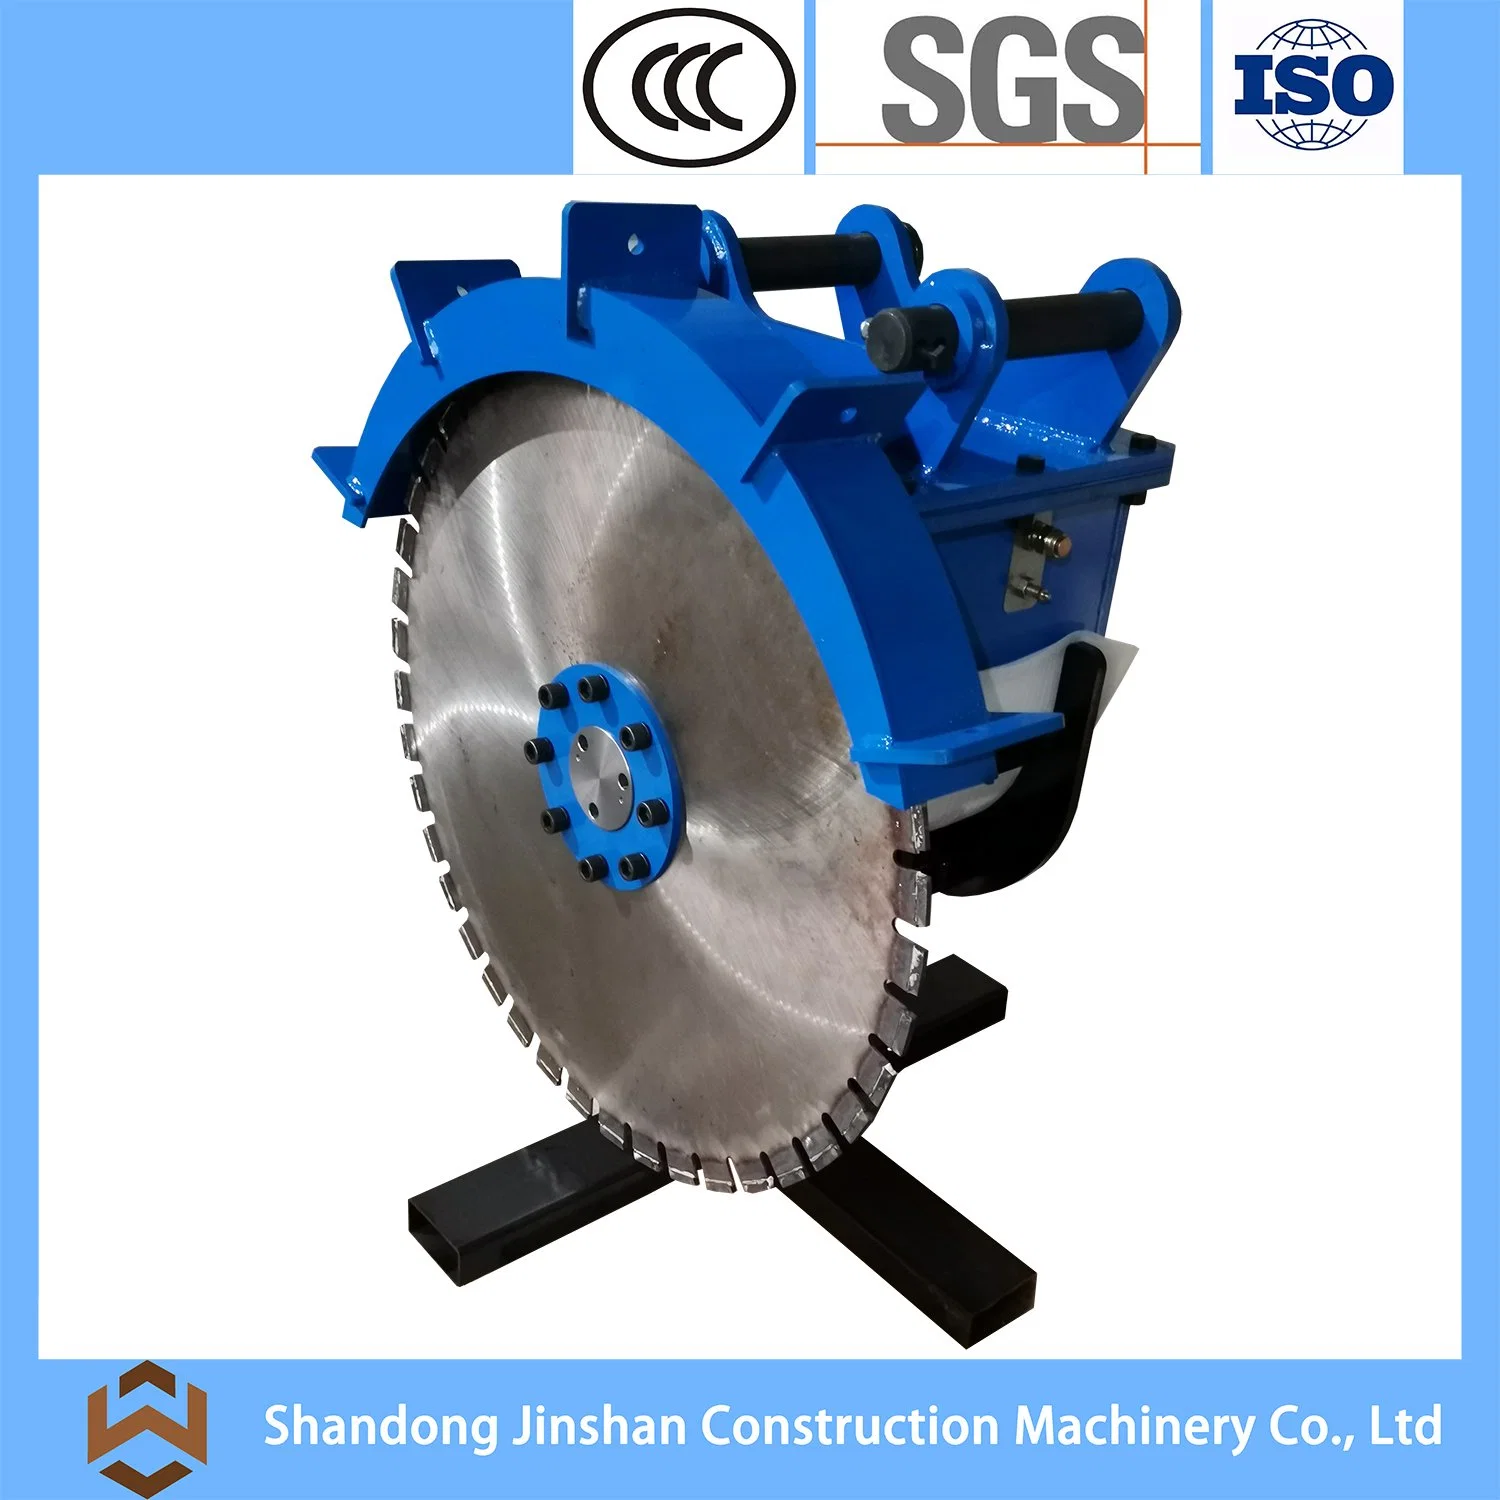 Hot - Selling Excavator Accessories for Quarry, Stone Cutting/ Saw Blade Cutting Tool/ Rotary Saw/ Round Saw